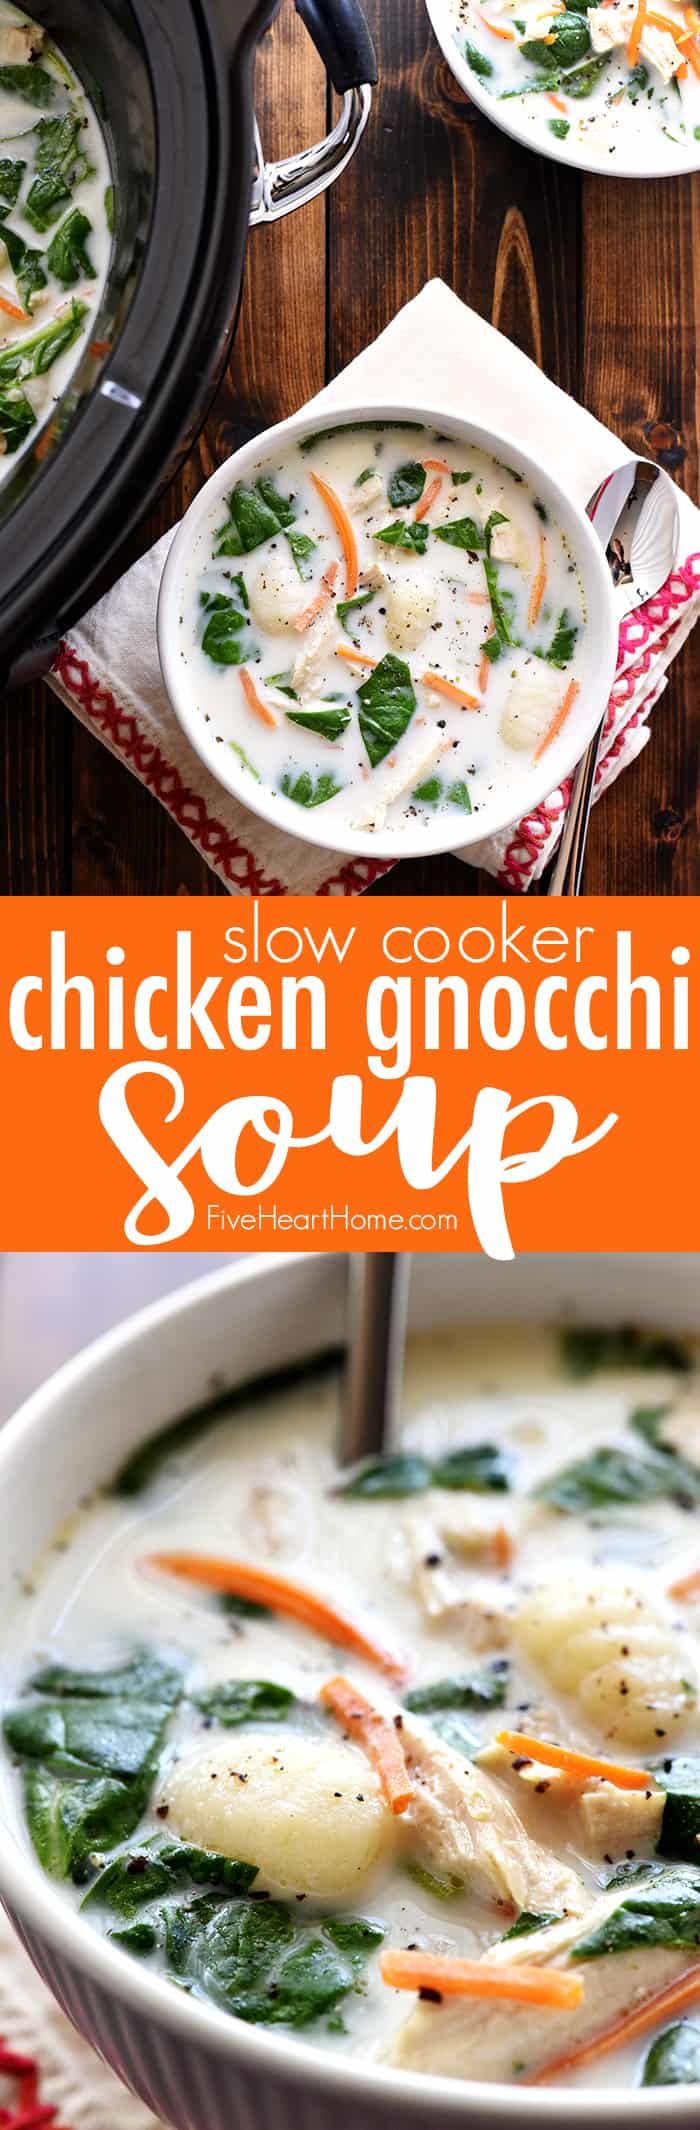 Slow Cooker Chicken Gnocchi Soup ~ a creamy, lightened-up copycat recipe of the famous Olive Garden classic, made easy thanks to the crockpot! | FiveHeartHome.com via @fivehearthome